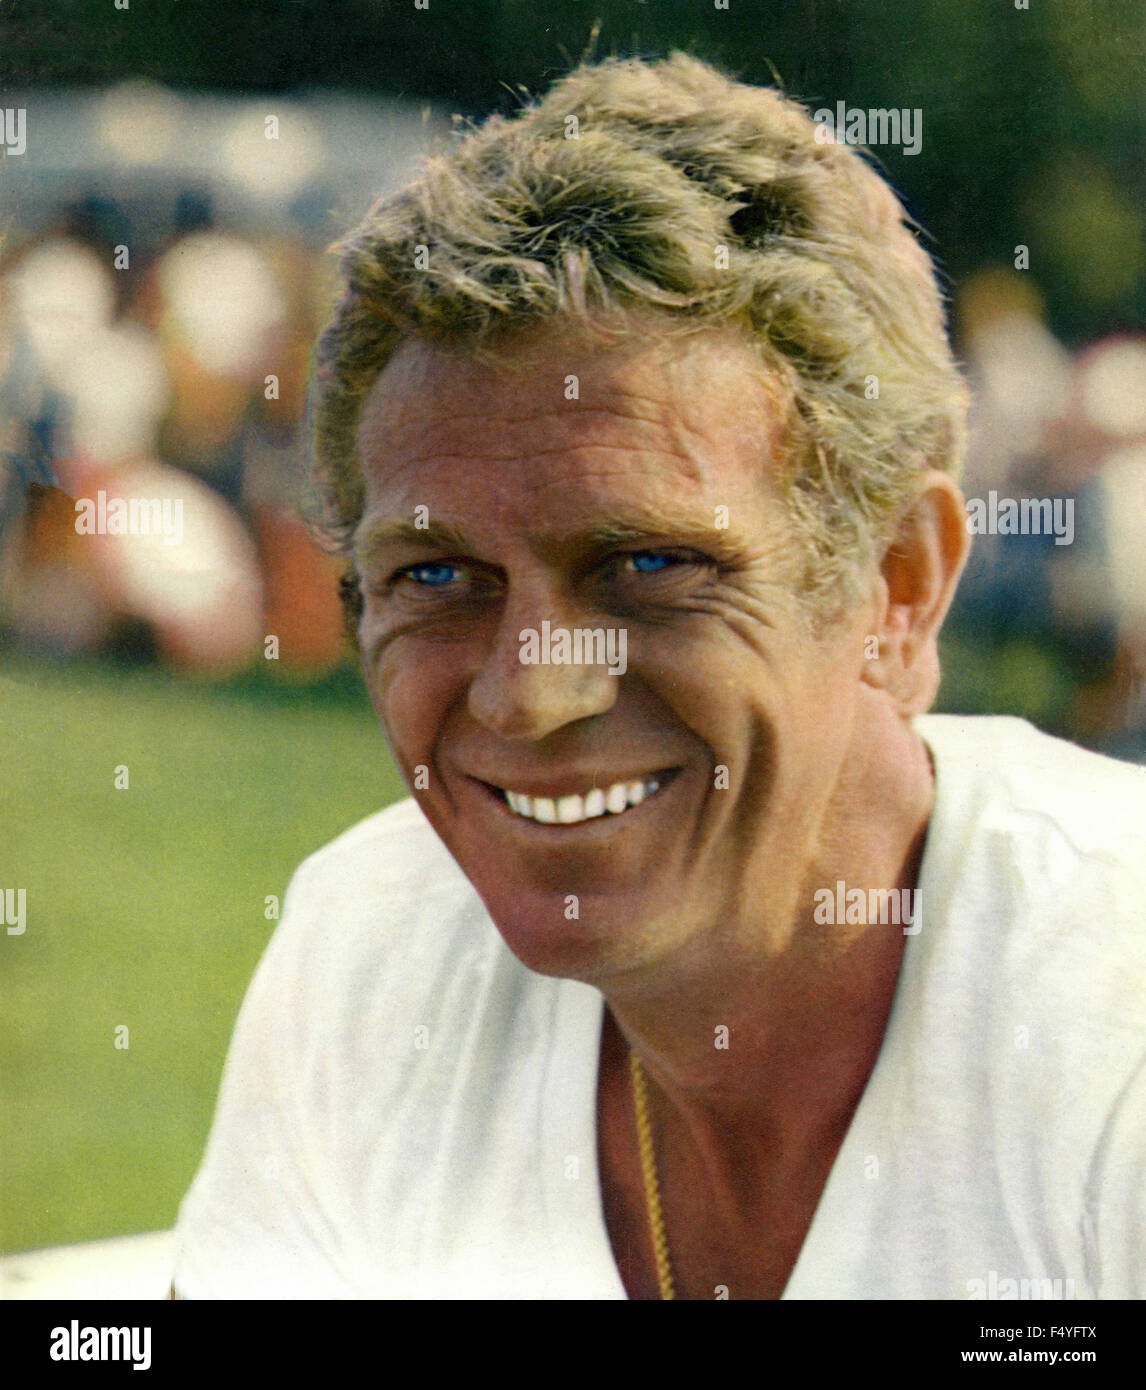 The actor Steve McQueen in a scene from the film 'The Thomas Crown Affair', 1968 Stock Photo